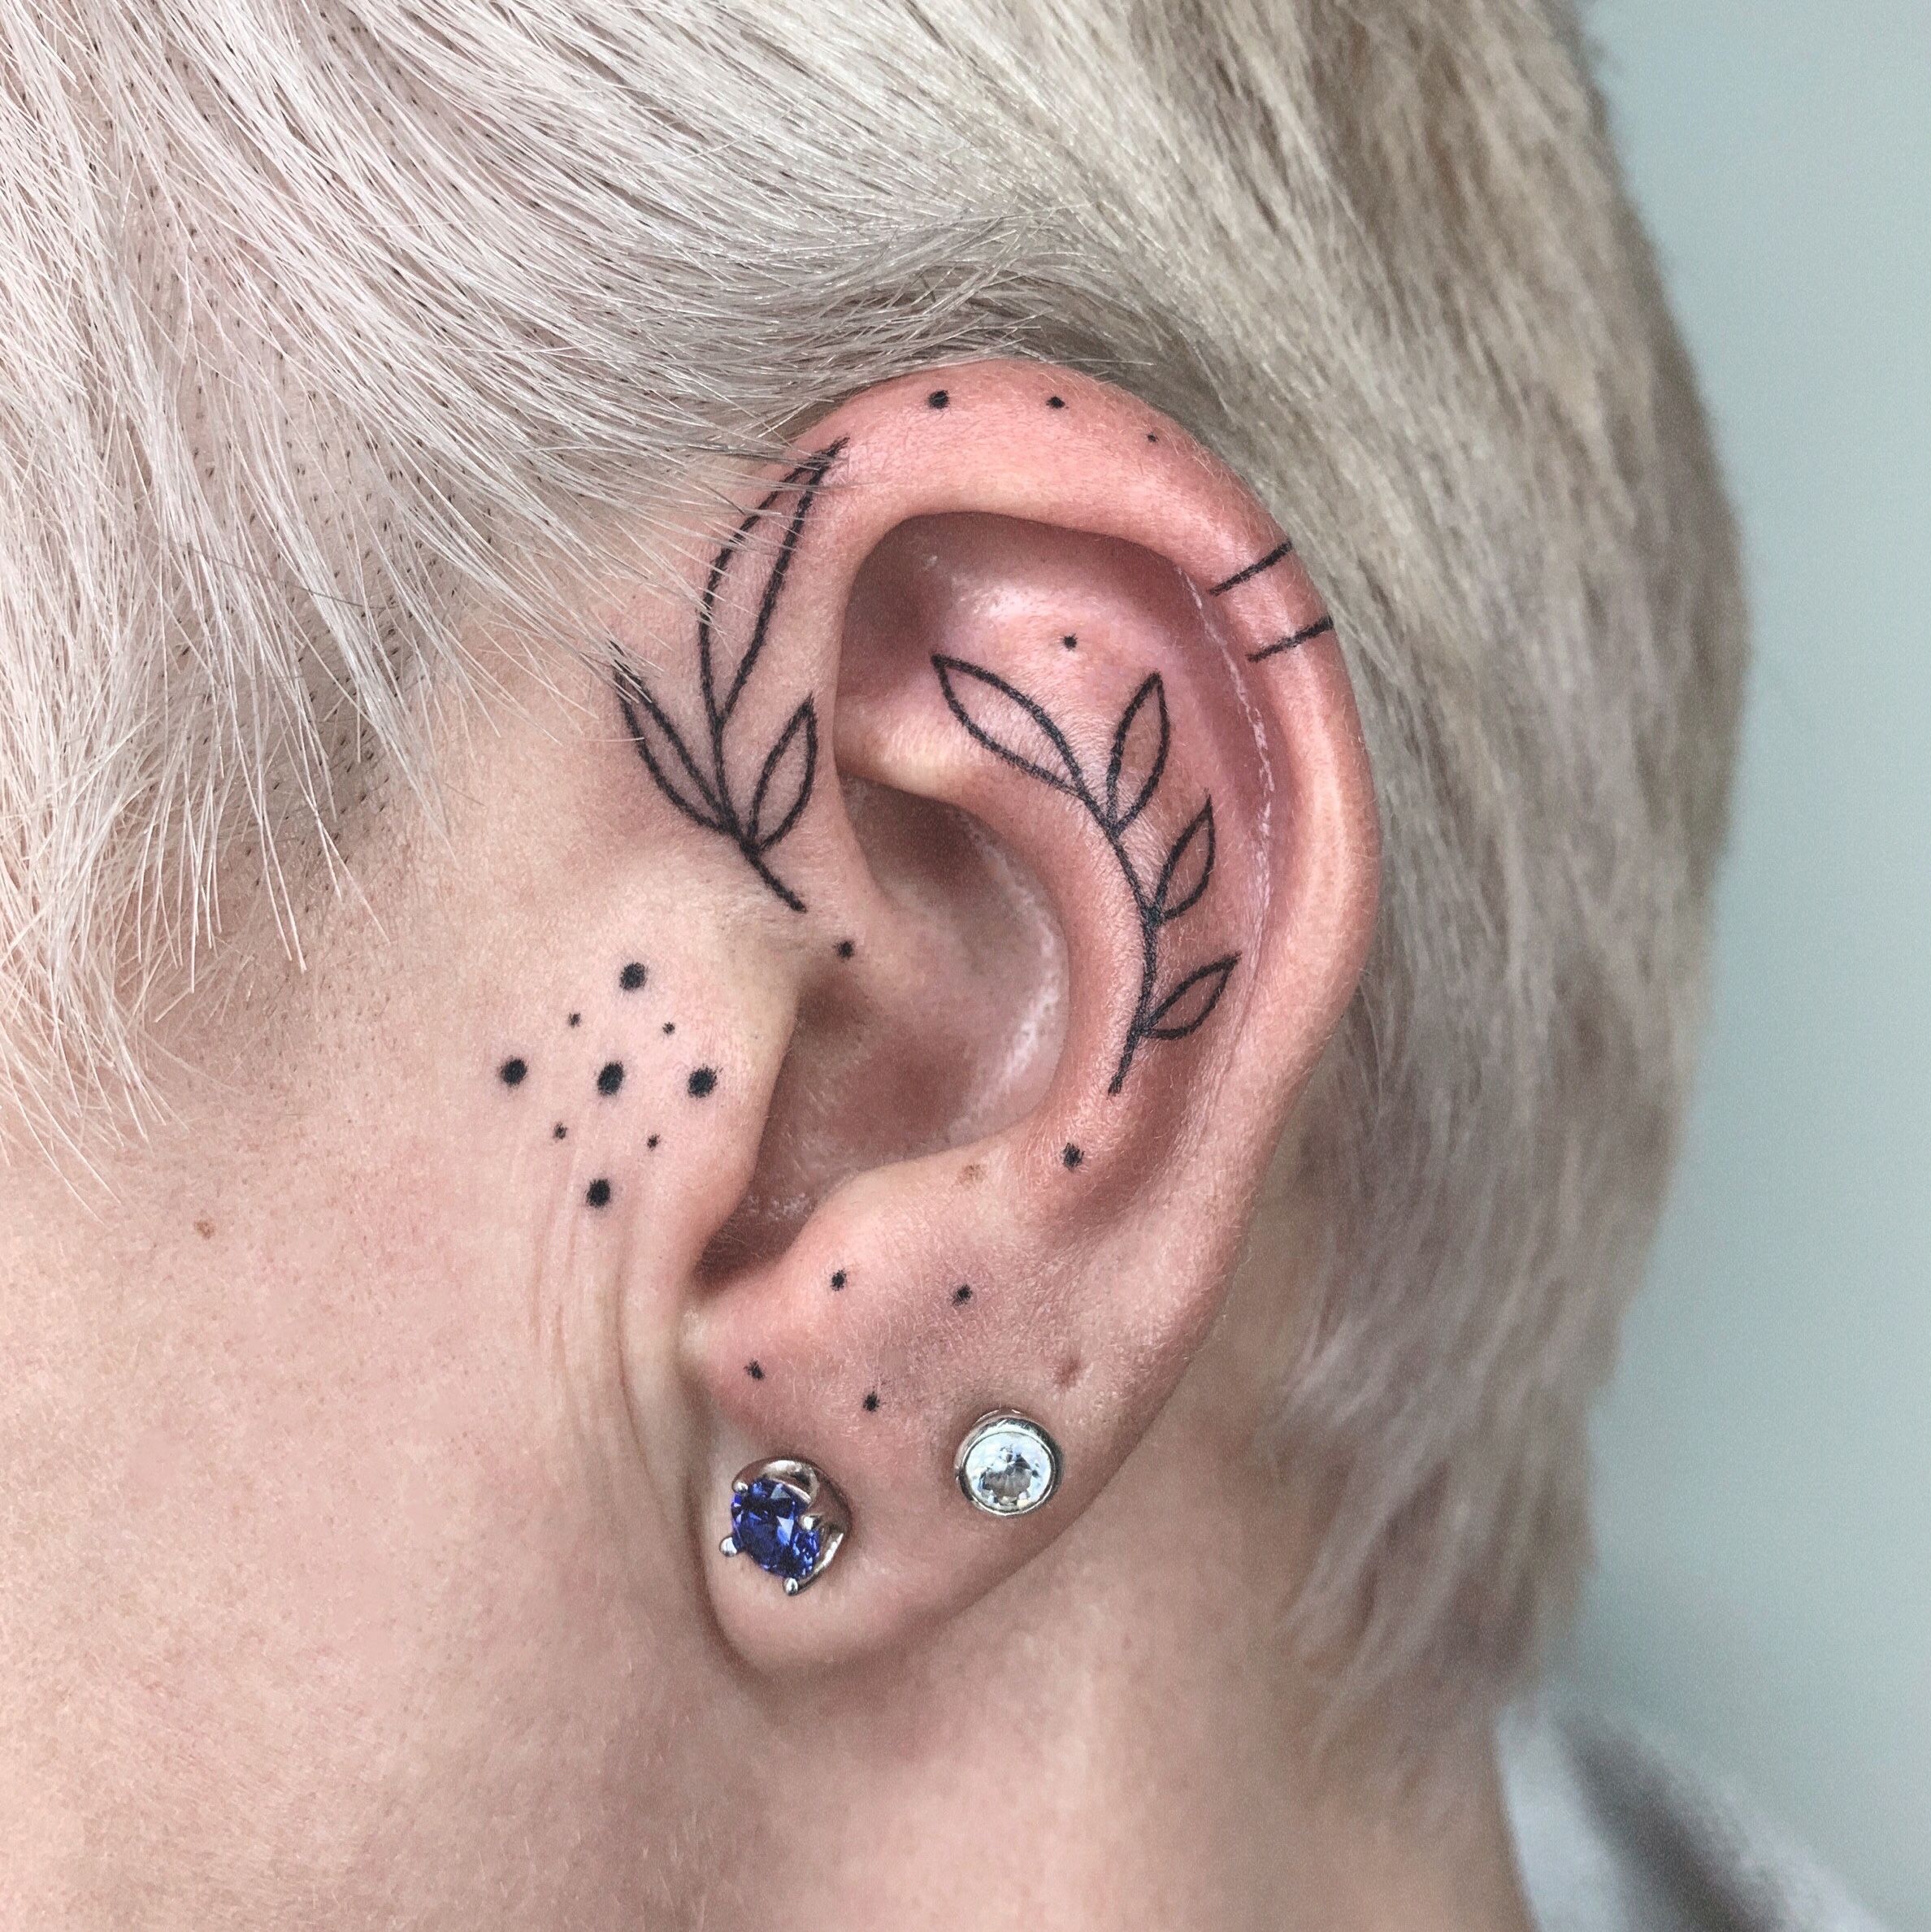 Ear Tattoos Make For the Perfect Ink as AccessoryHeres Why